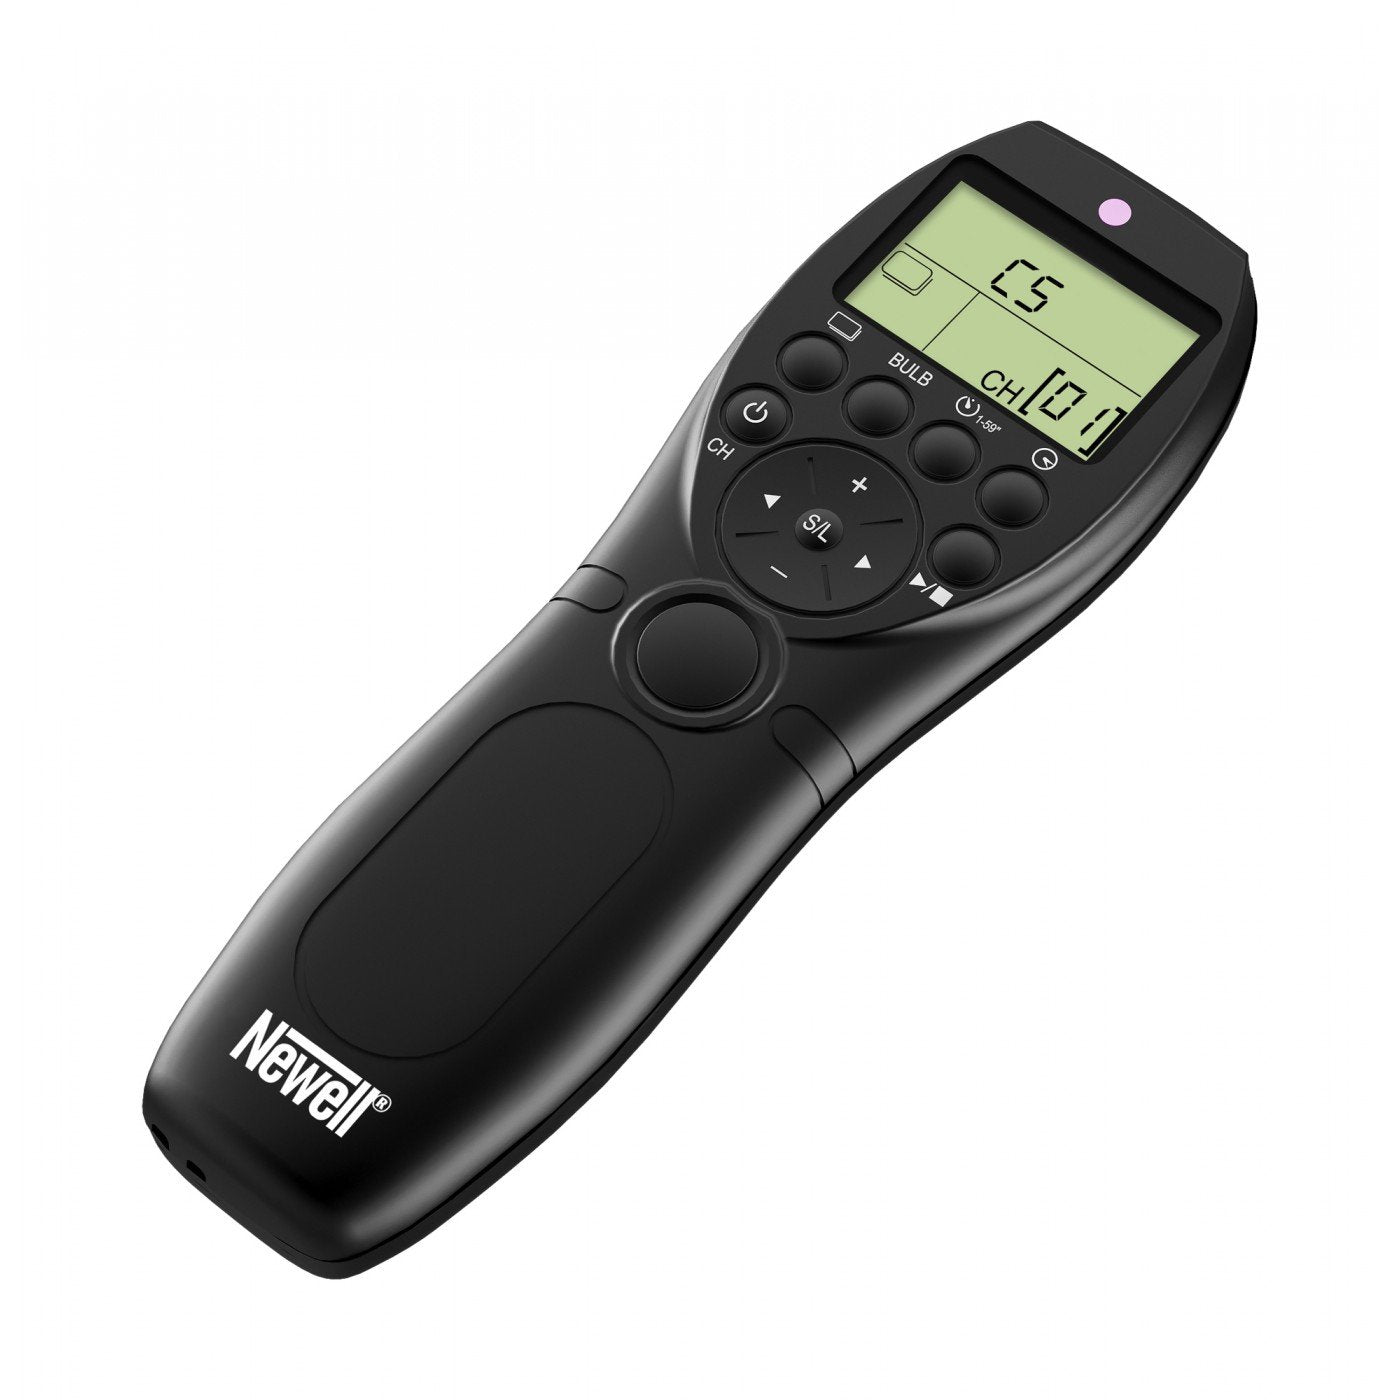 Product Image of Newell Wireless remote control with intervalometer for Sony